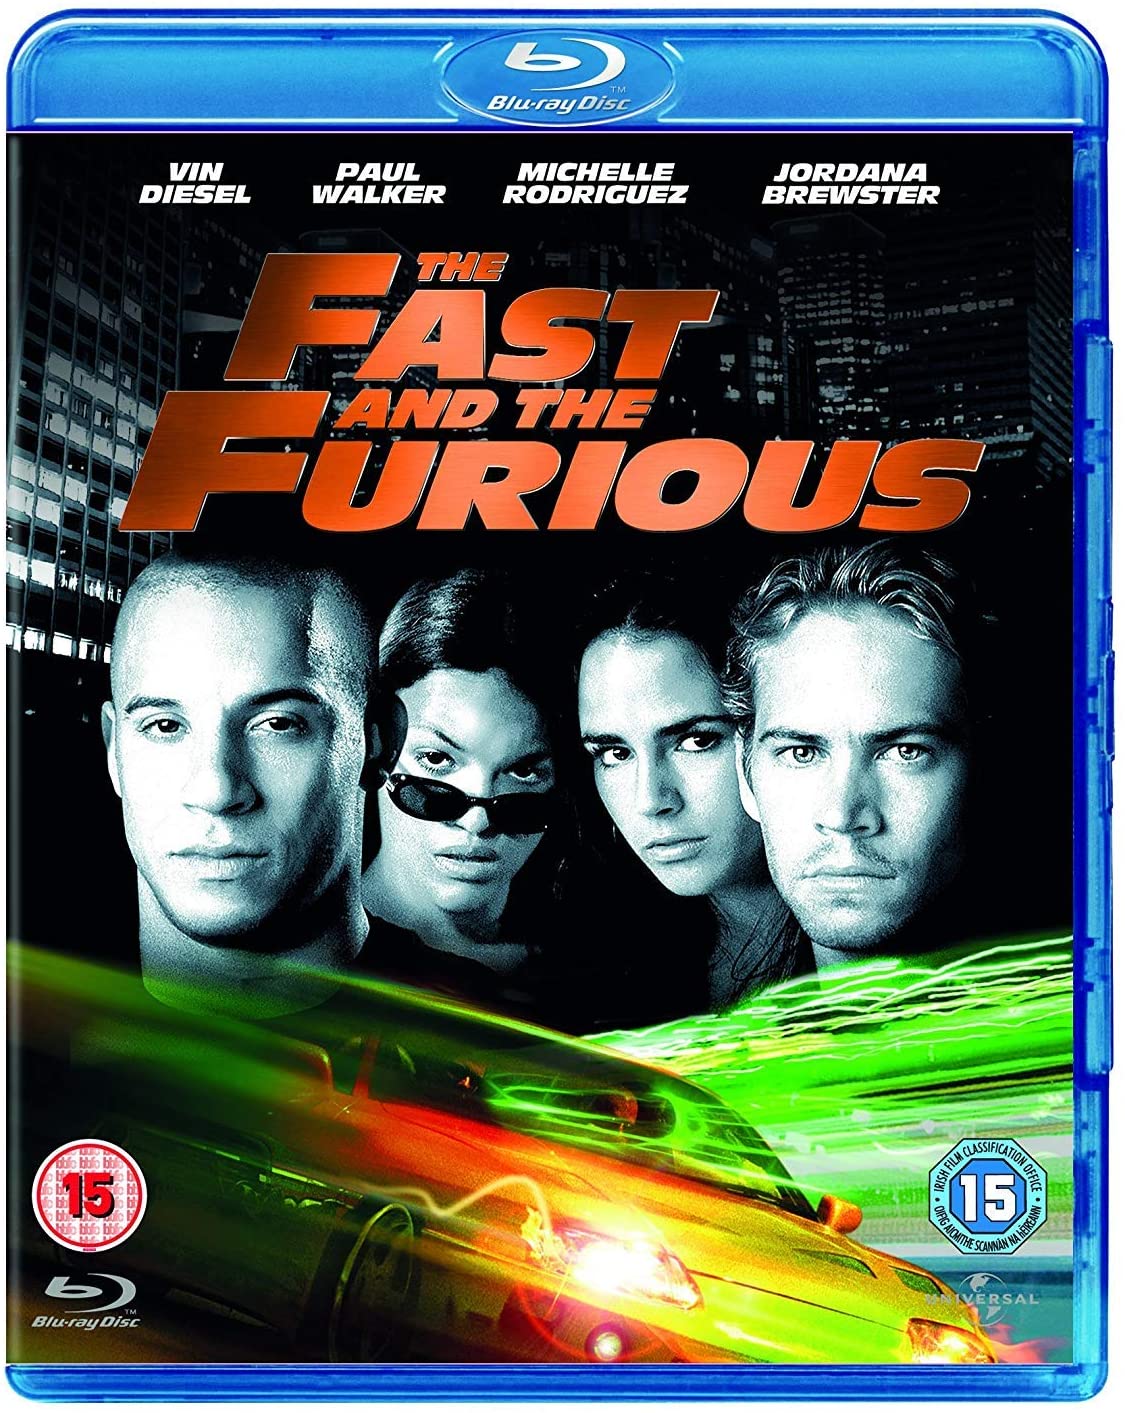 The Fast And The Furious 1080p BDRip Full HD